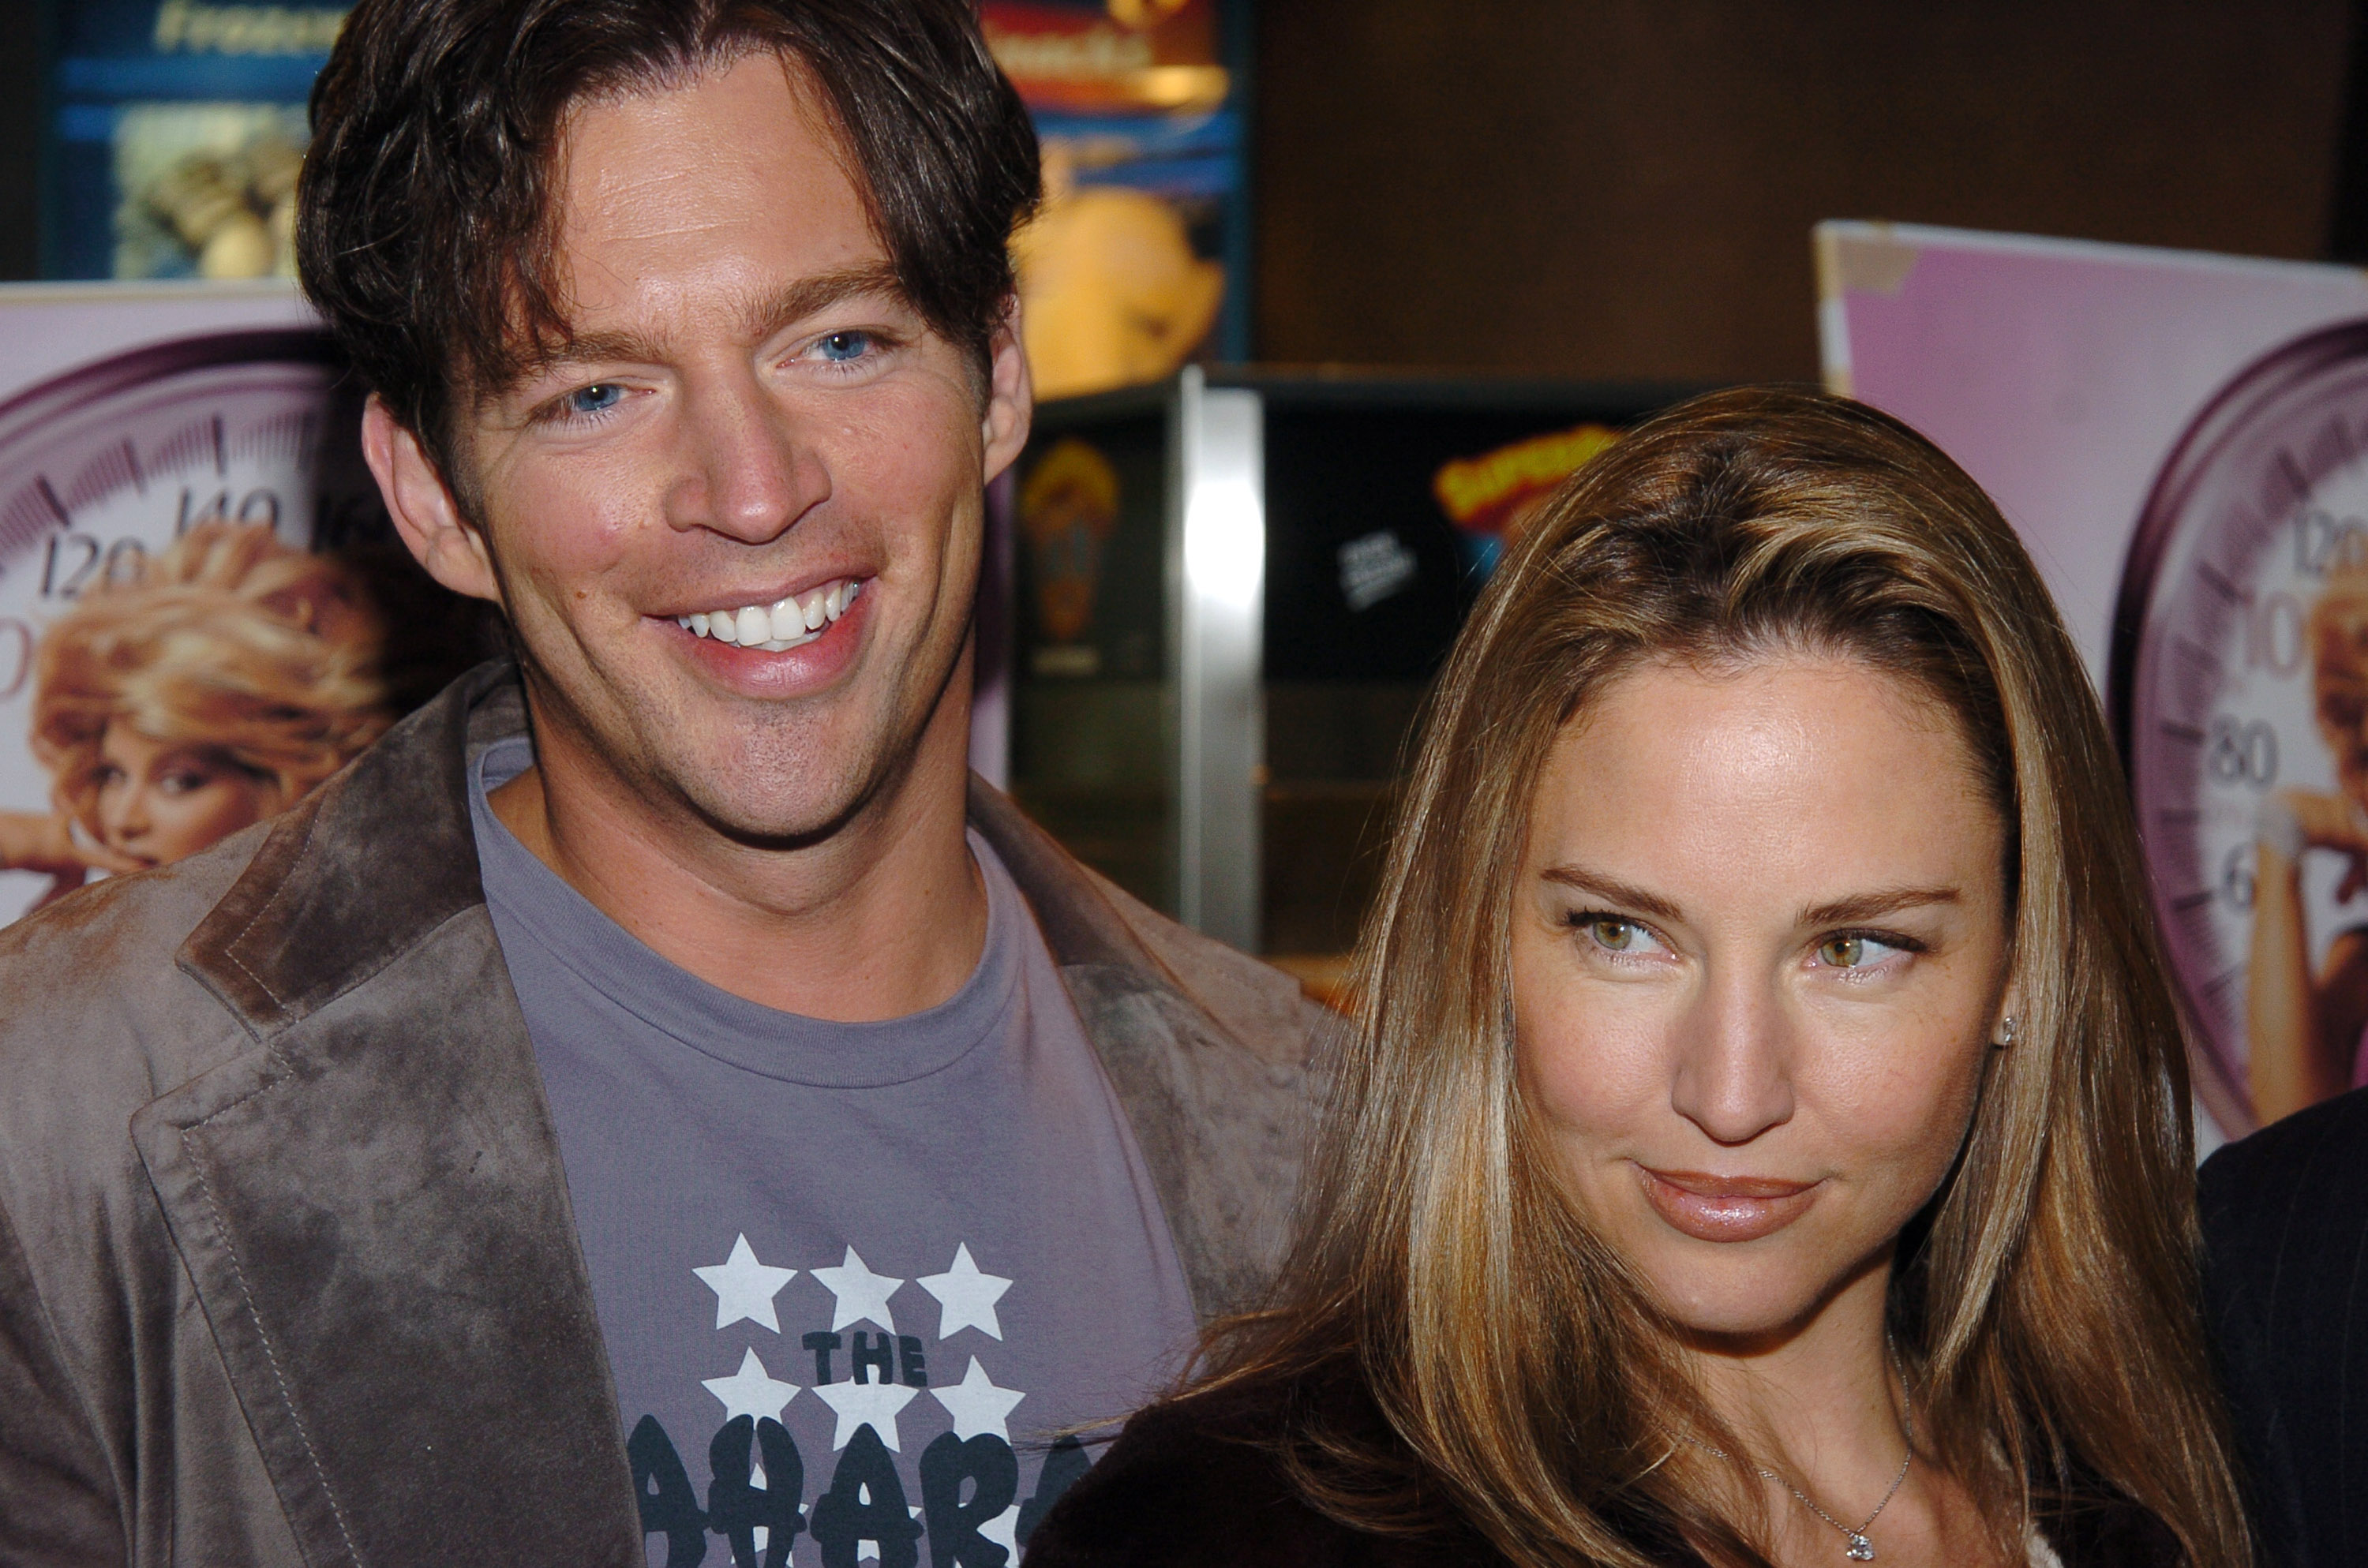 Harry Connick Jr. and Jill Goodacre pose at a movie premiere.